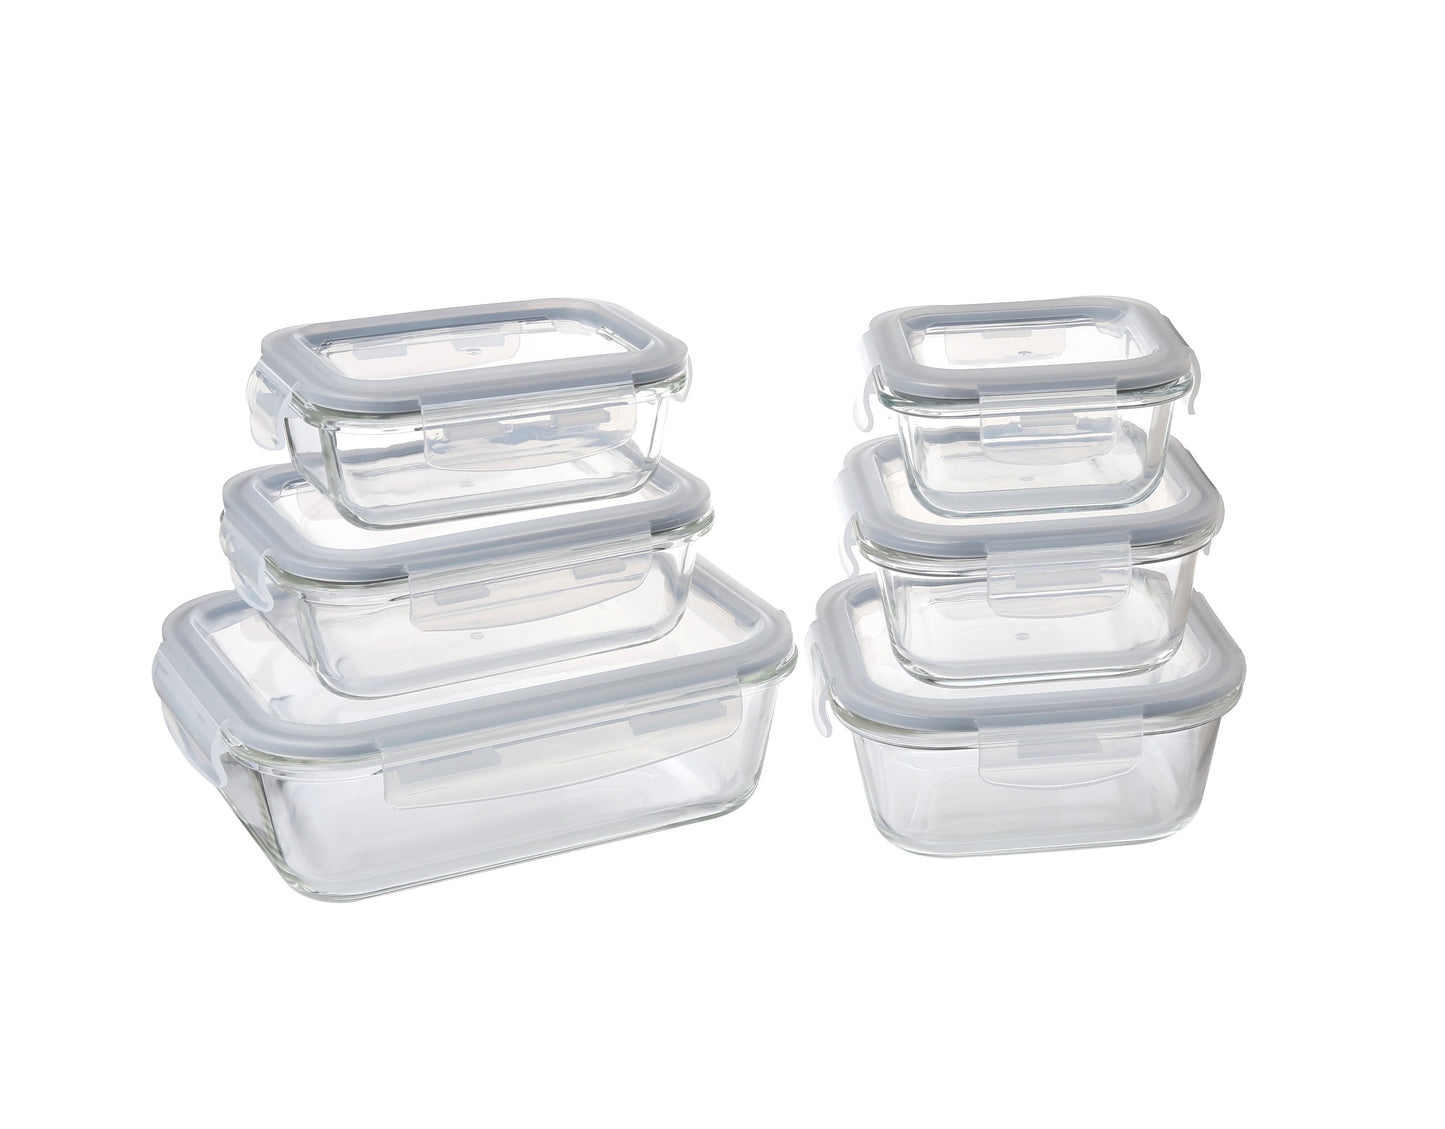 Delight King Glass Storage Containers Set - 12-Piece High Borosilicate Glass Meal Prep Containers - Airtight and Leak-Proof Kitchen Storage Containers - Oven, Microwave, Freezer, Dishwasher Safe